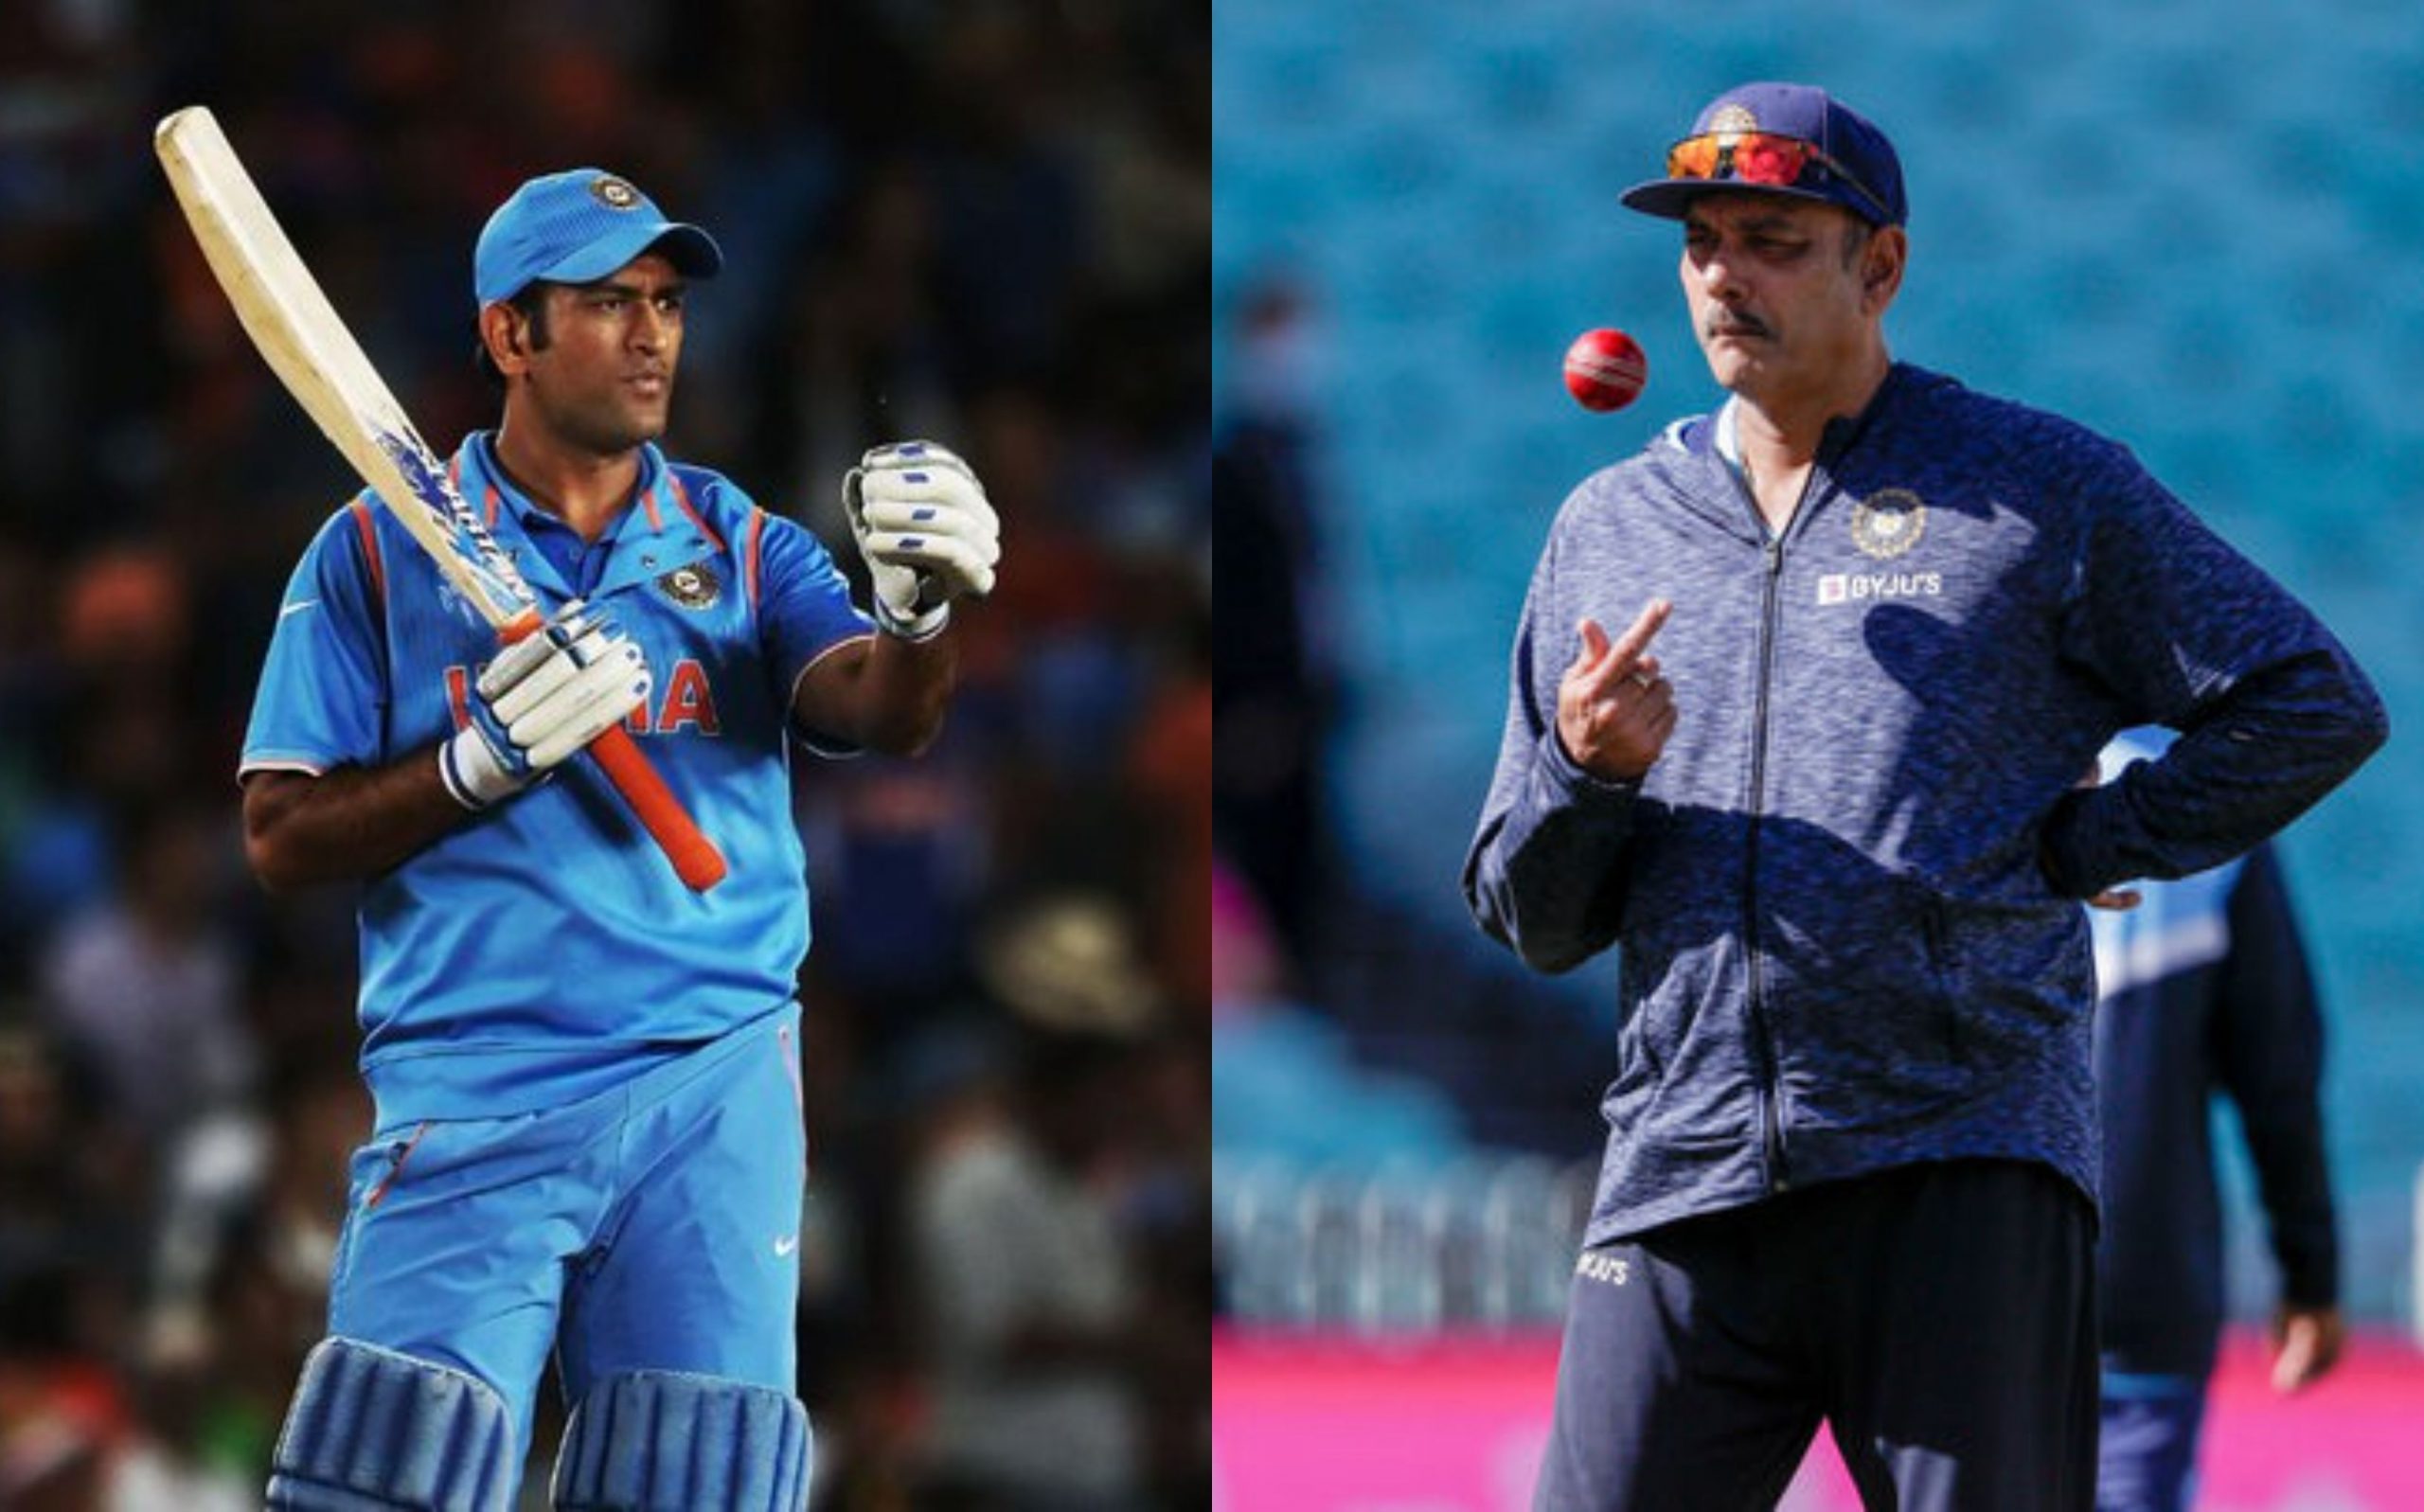 Gavaskar welcomes mentor Dhoni, hopes there are no clashes with Shastri